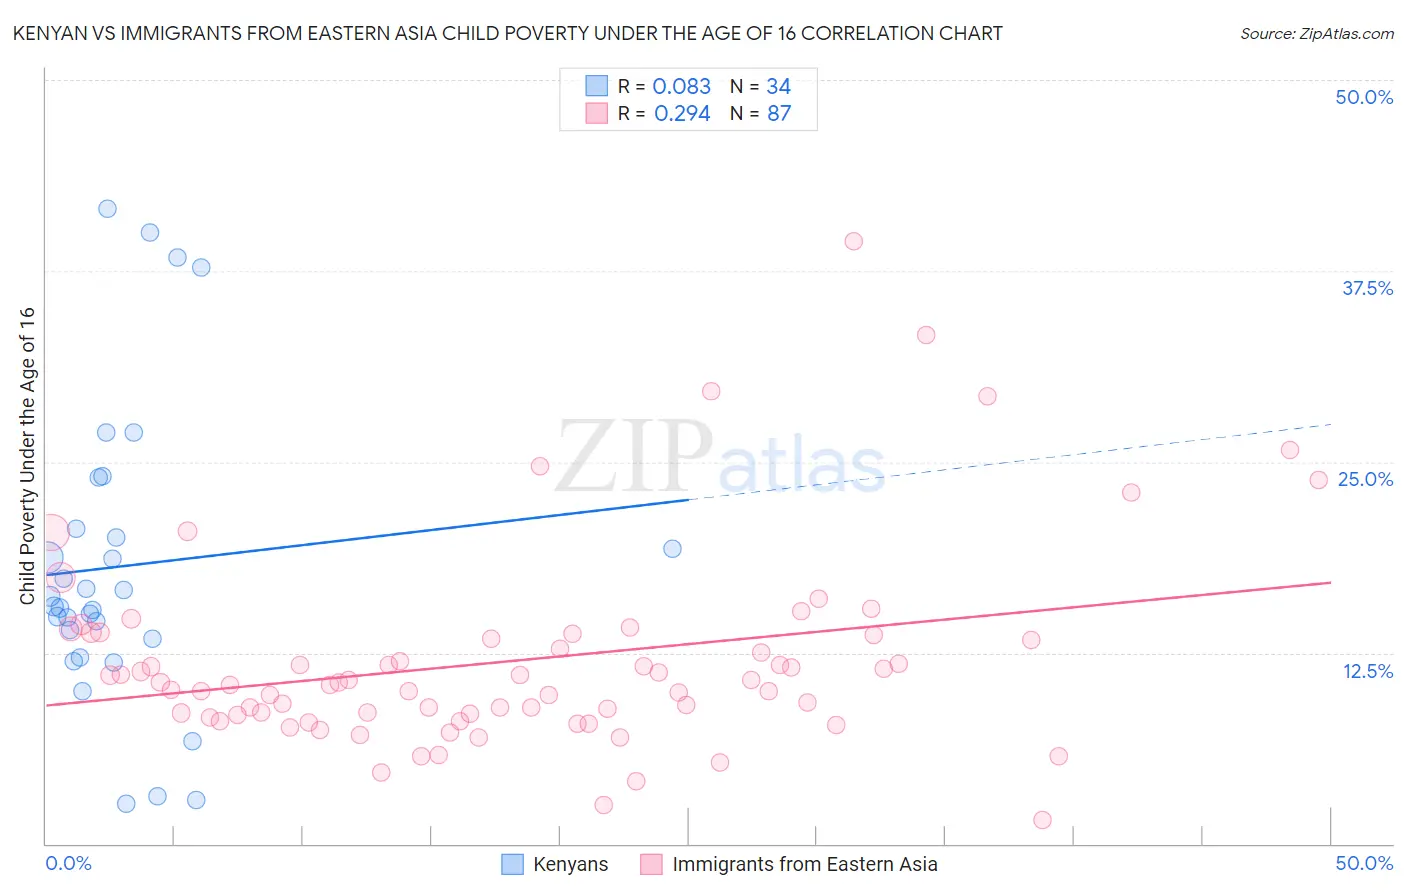 Kenyan vs Immigrants from Eastern Asia Child Poverty Under the Age of 16